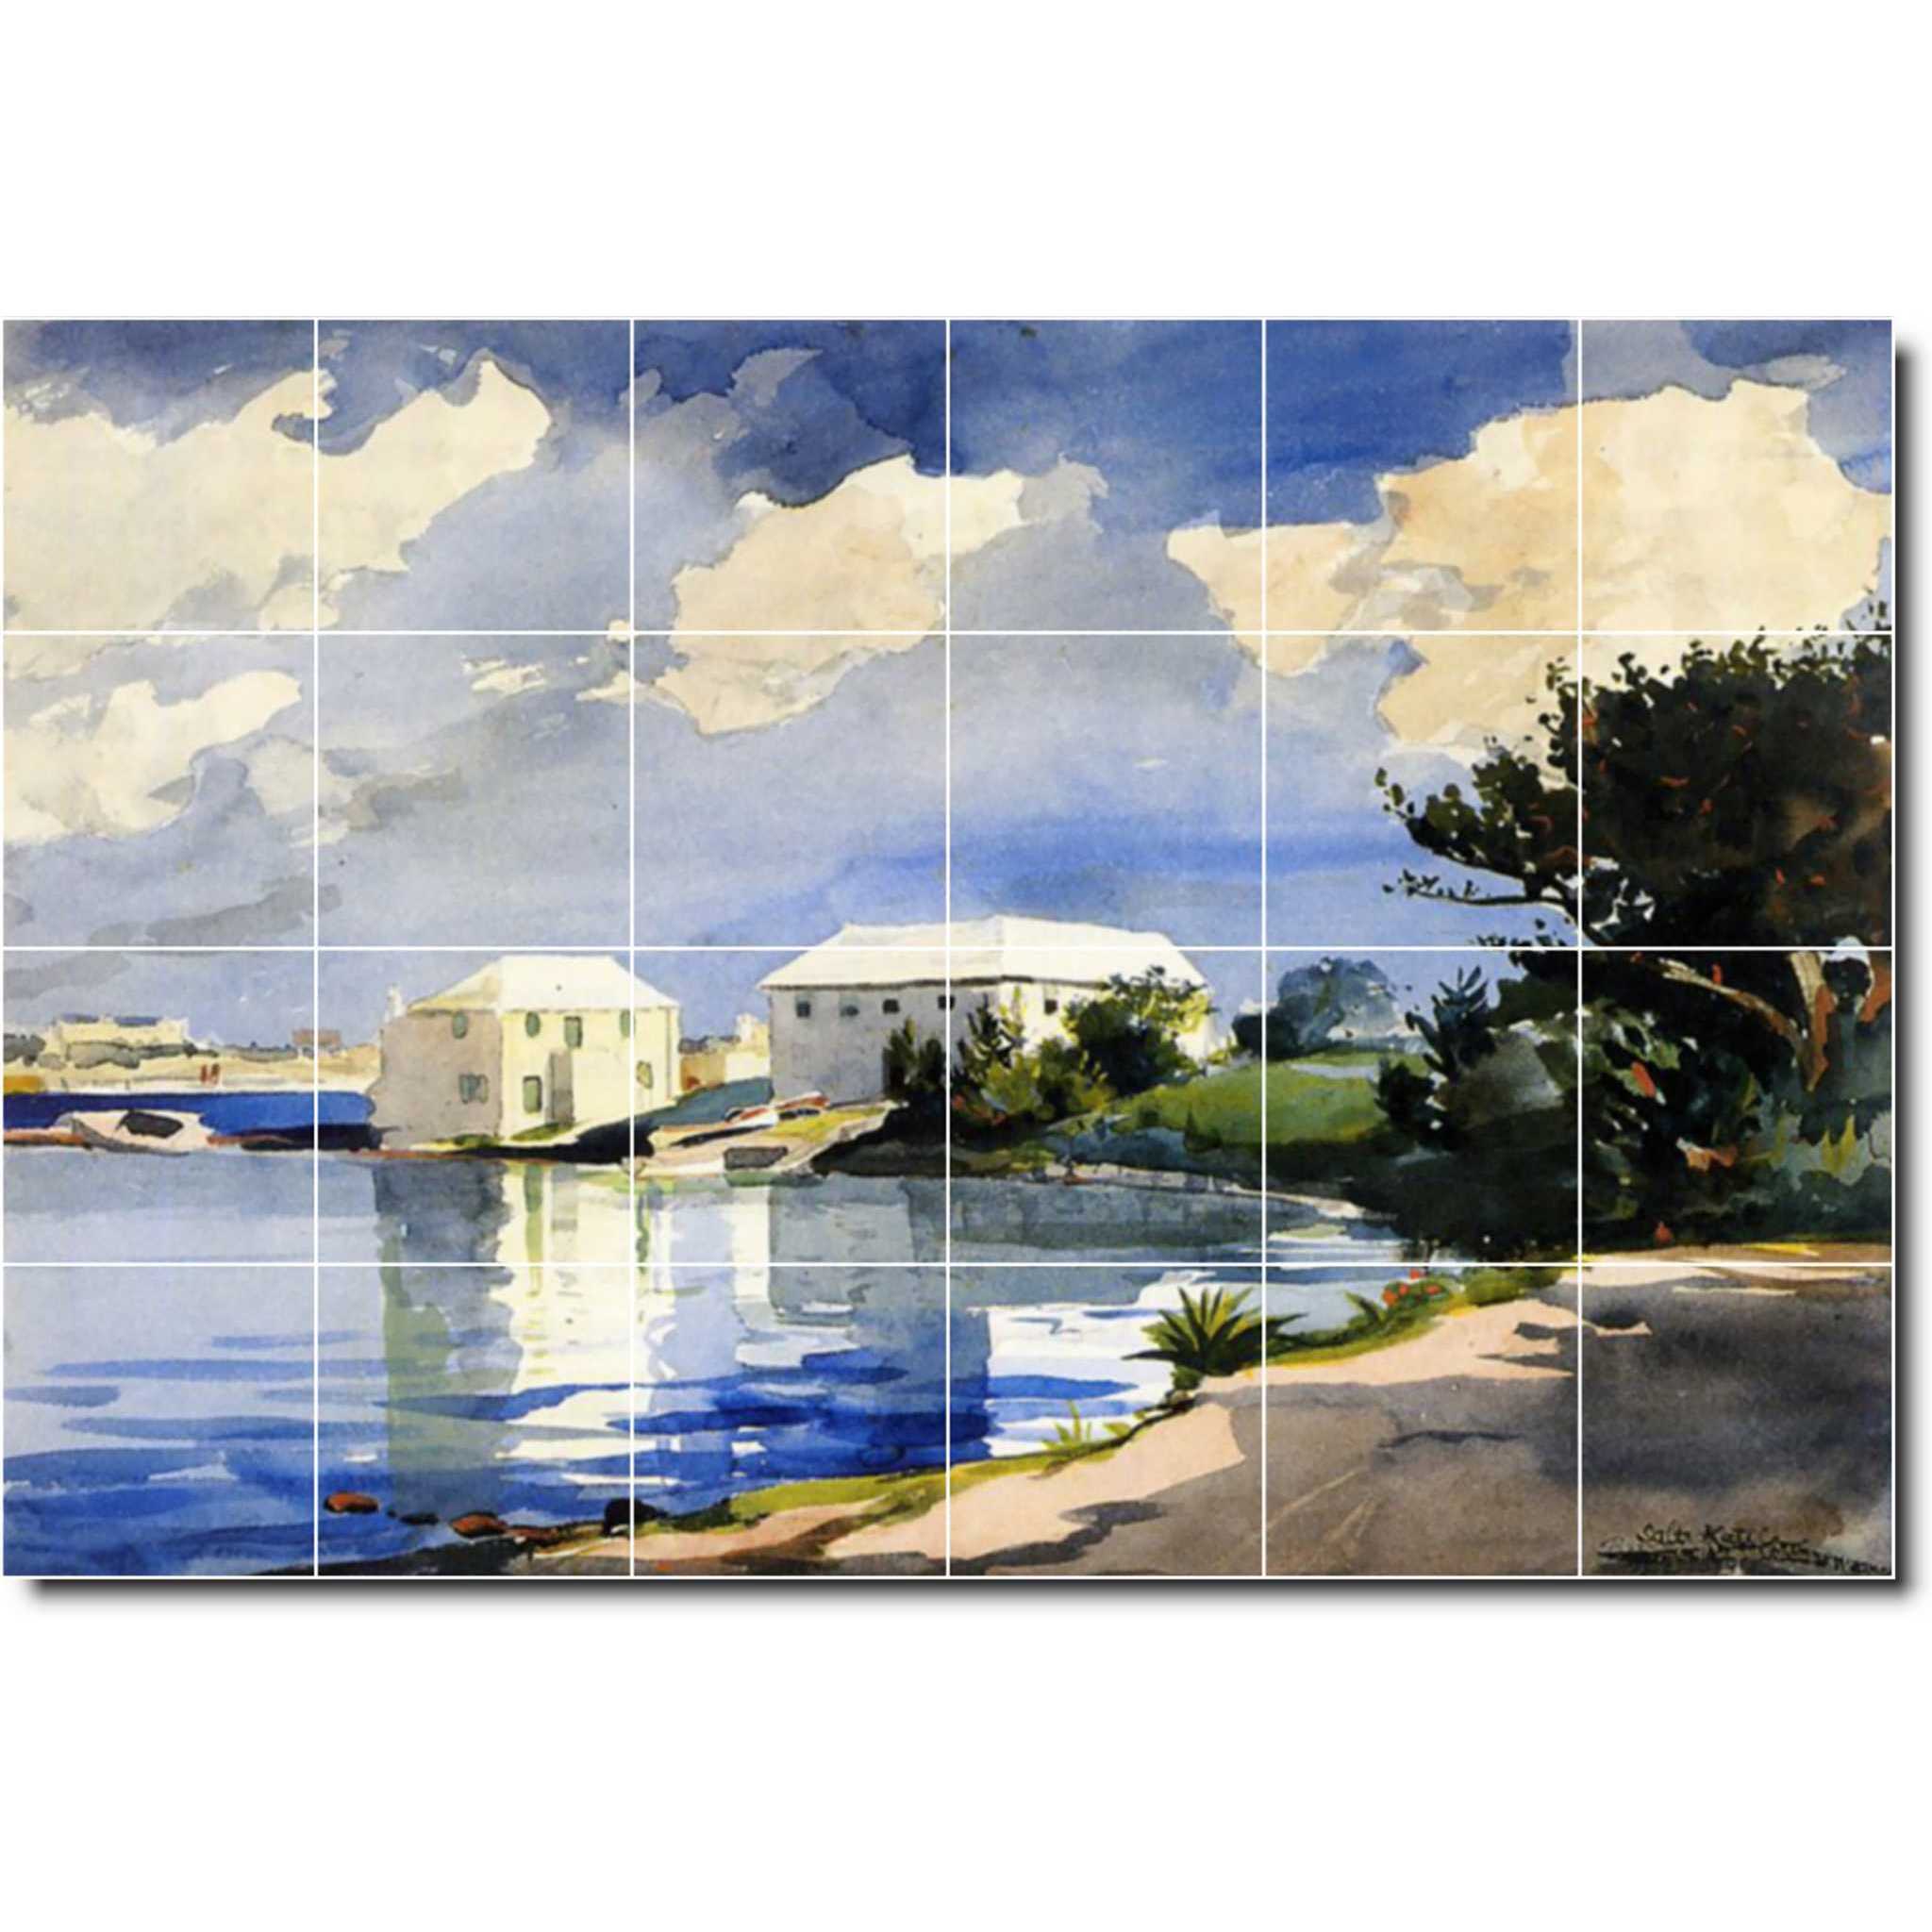 Winslow Homer Waterfront Painting Ceramic Tile Mural P04459-XL. 72"W x 48"H (24) 12x12 tiles